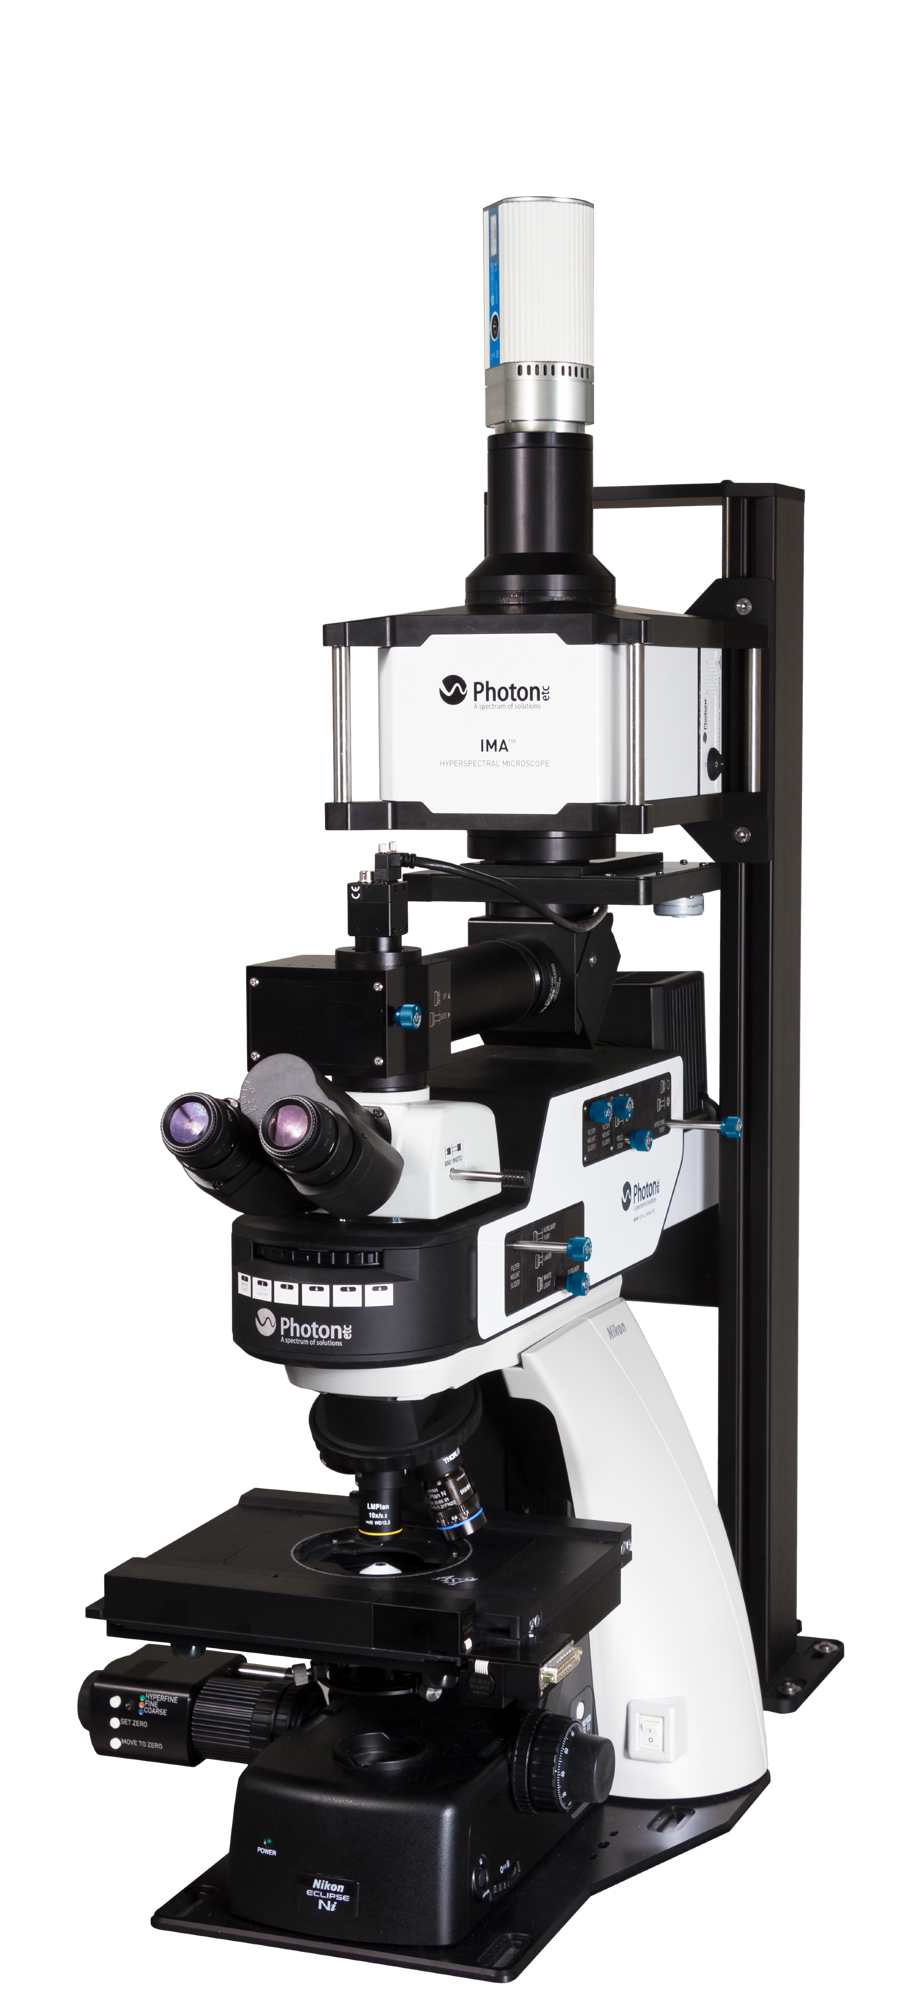 IMA™ - Hyperspectral imaging system for next-gen photovoltaics characterization and optimization